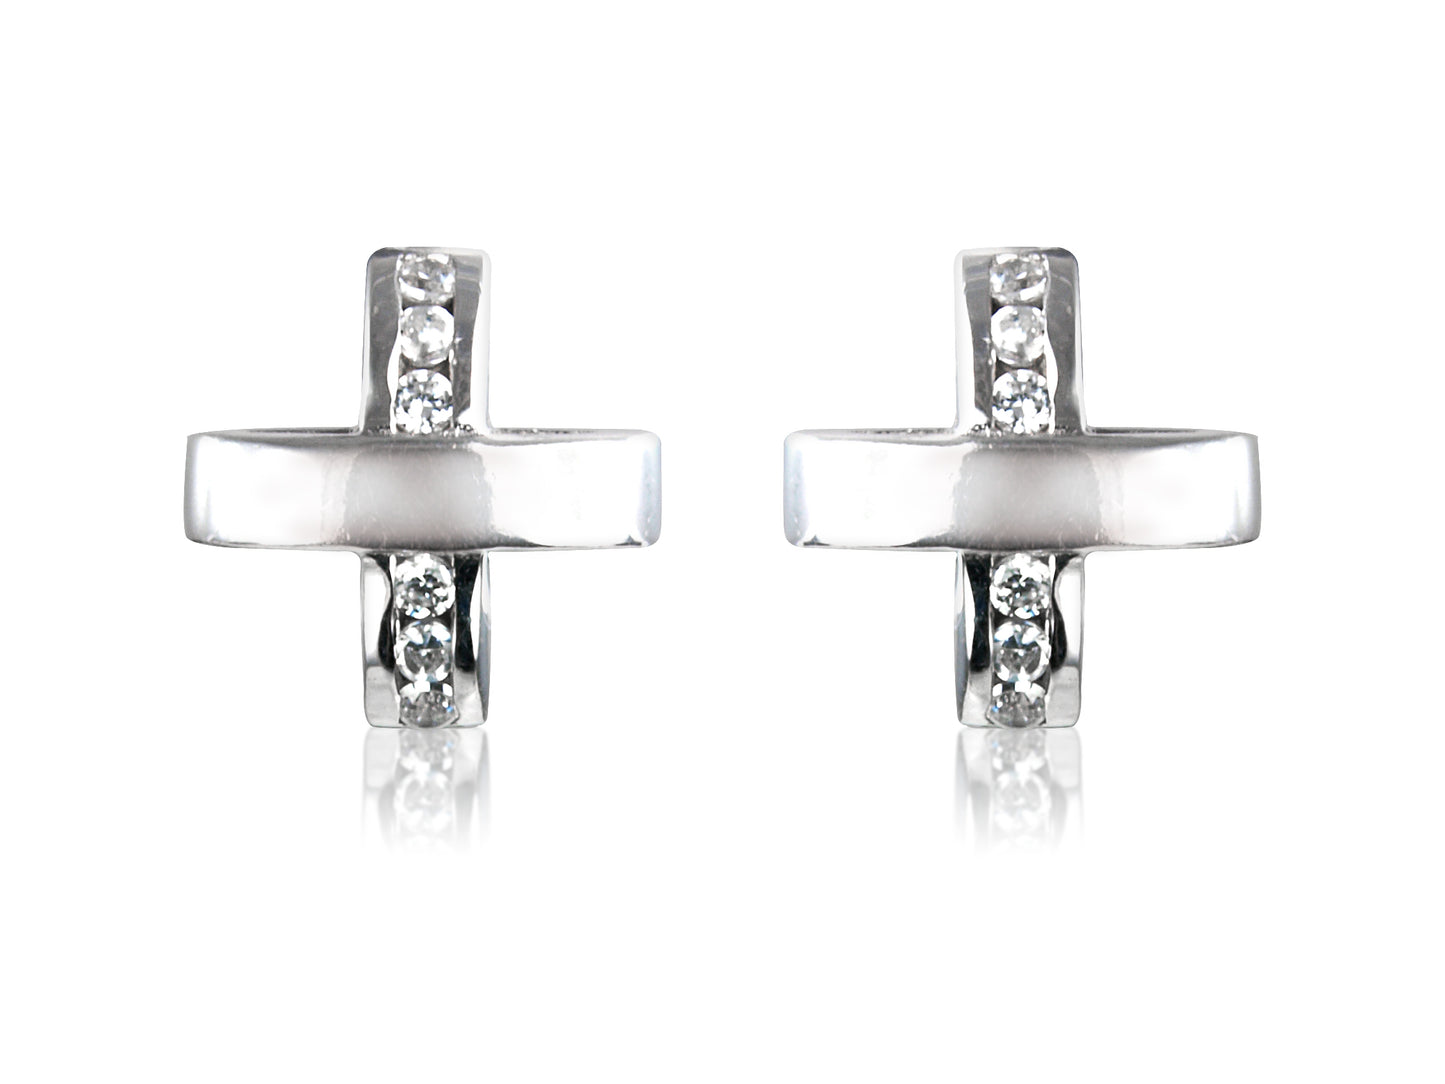 White Cubic Zirconia Cross Sterling Silver Studs